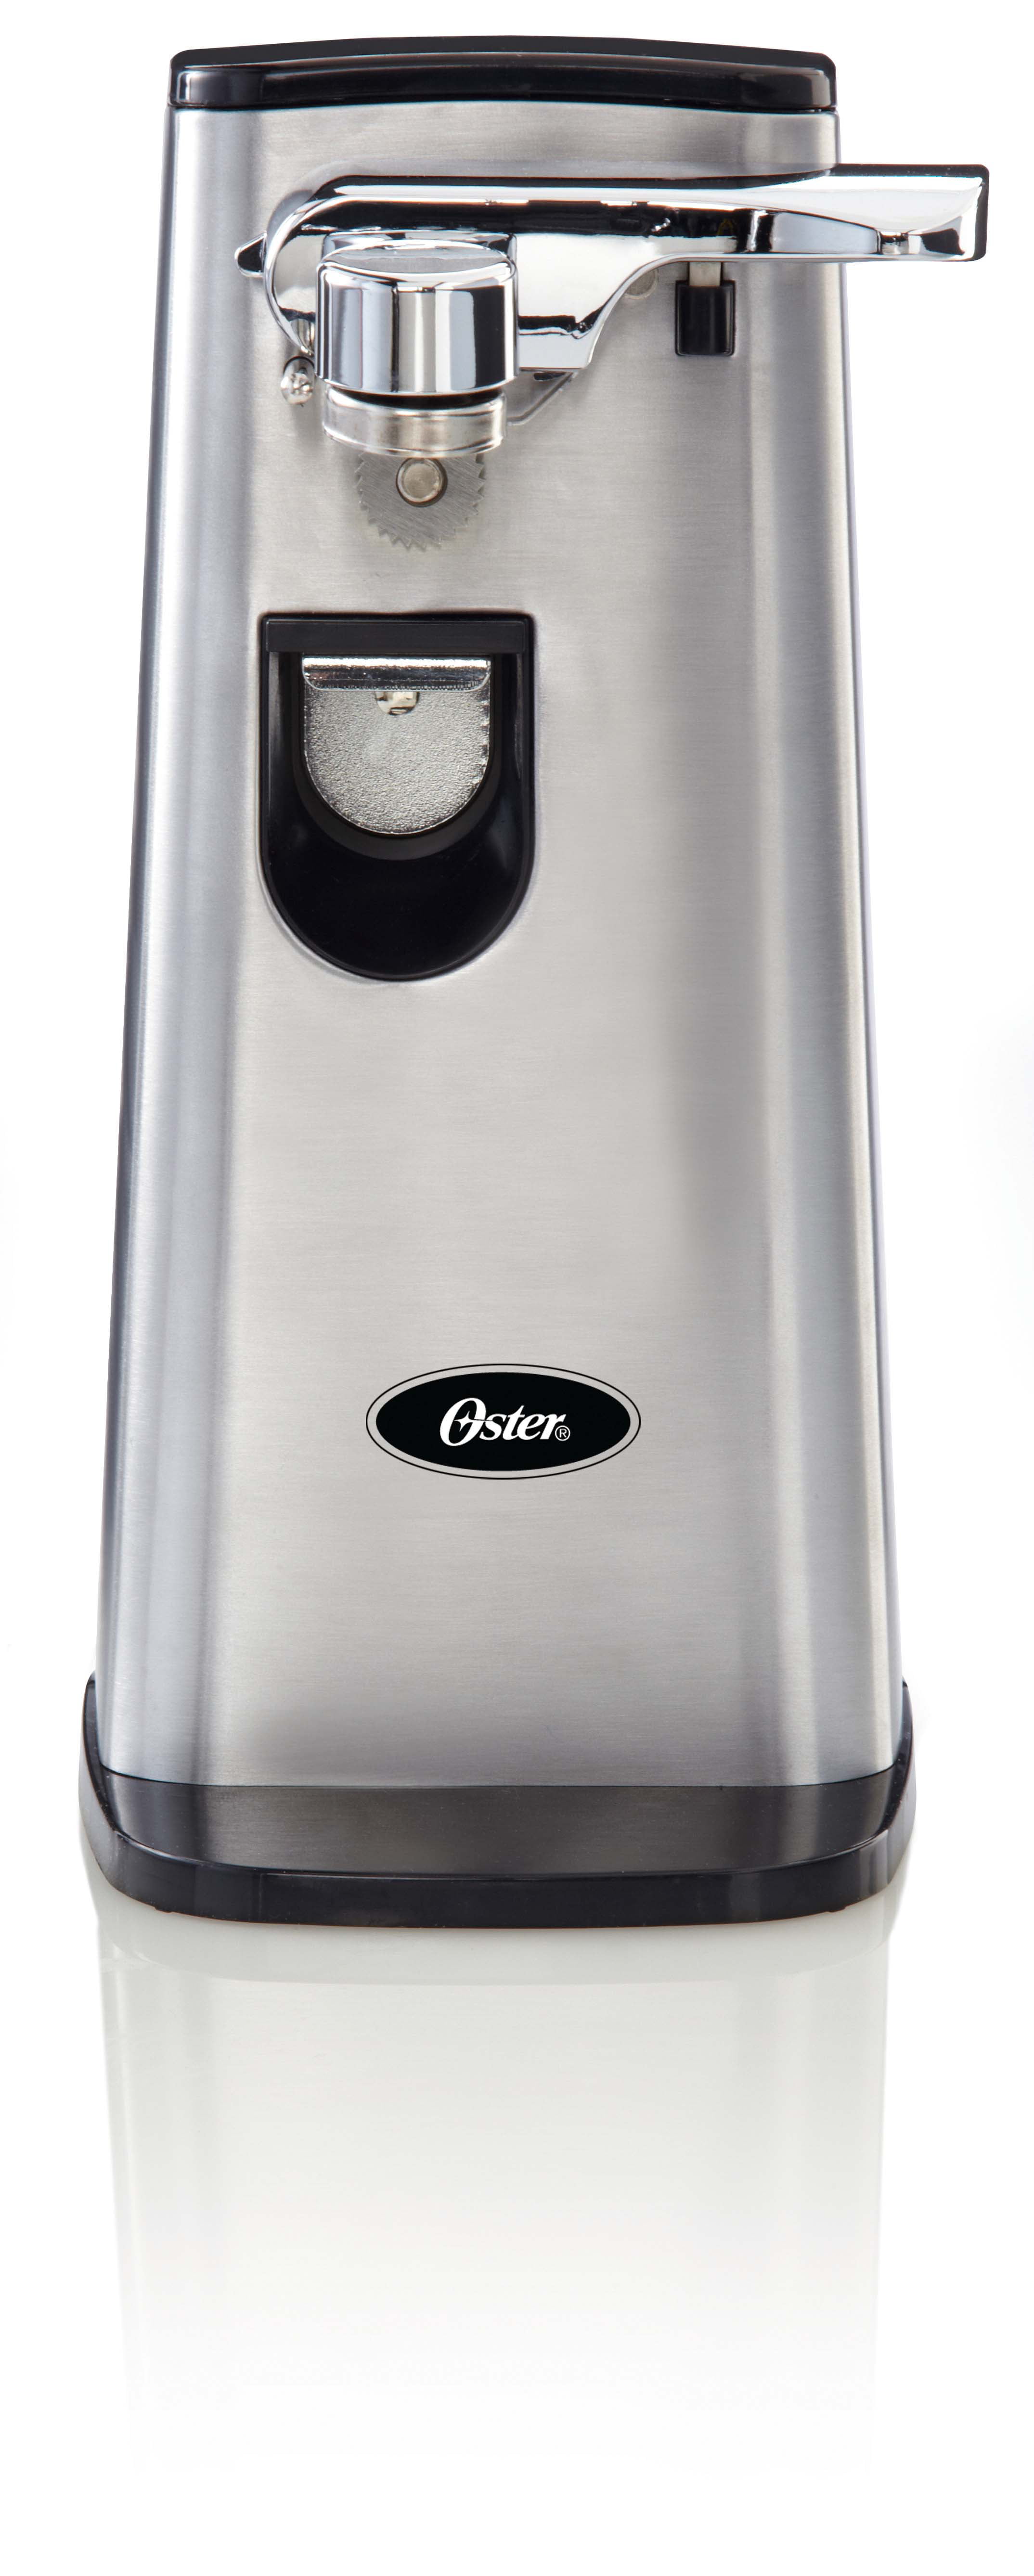 Oster FPSTCN1300 Electric Can Opener Stainless Steel